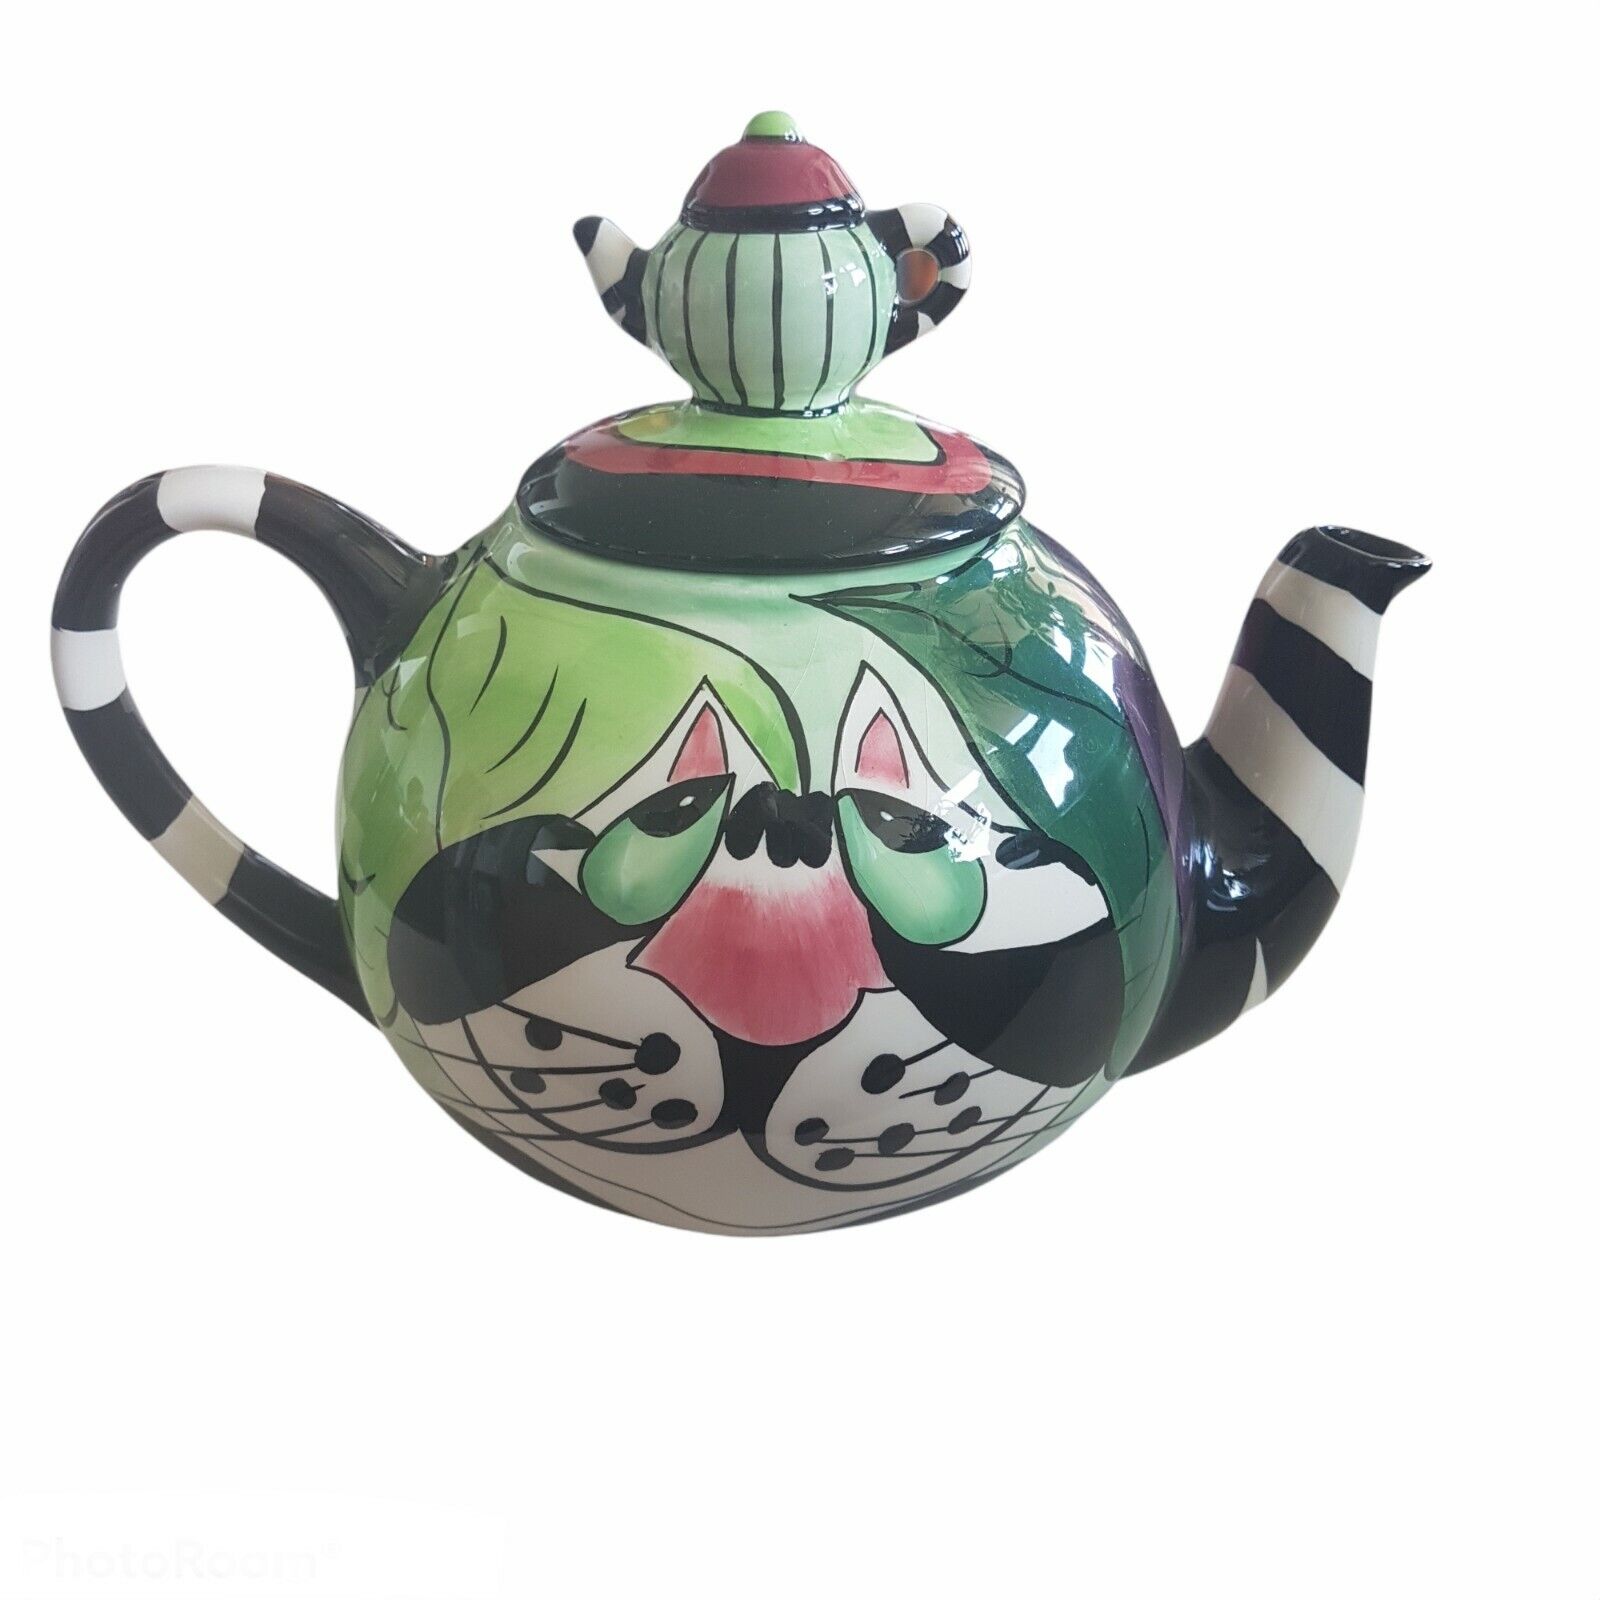 Swak Lynda Corneille Tea Pot Signed Collectable Clancey Cat Whimsical Ceramic